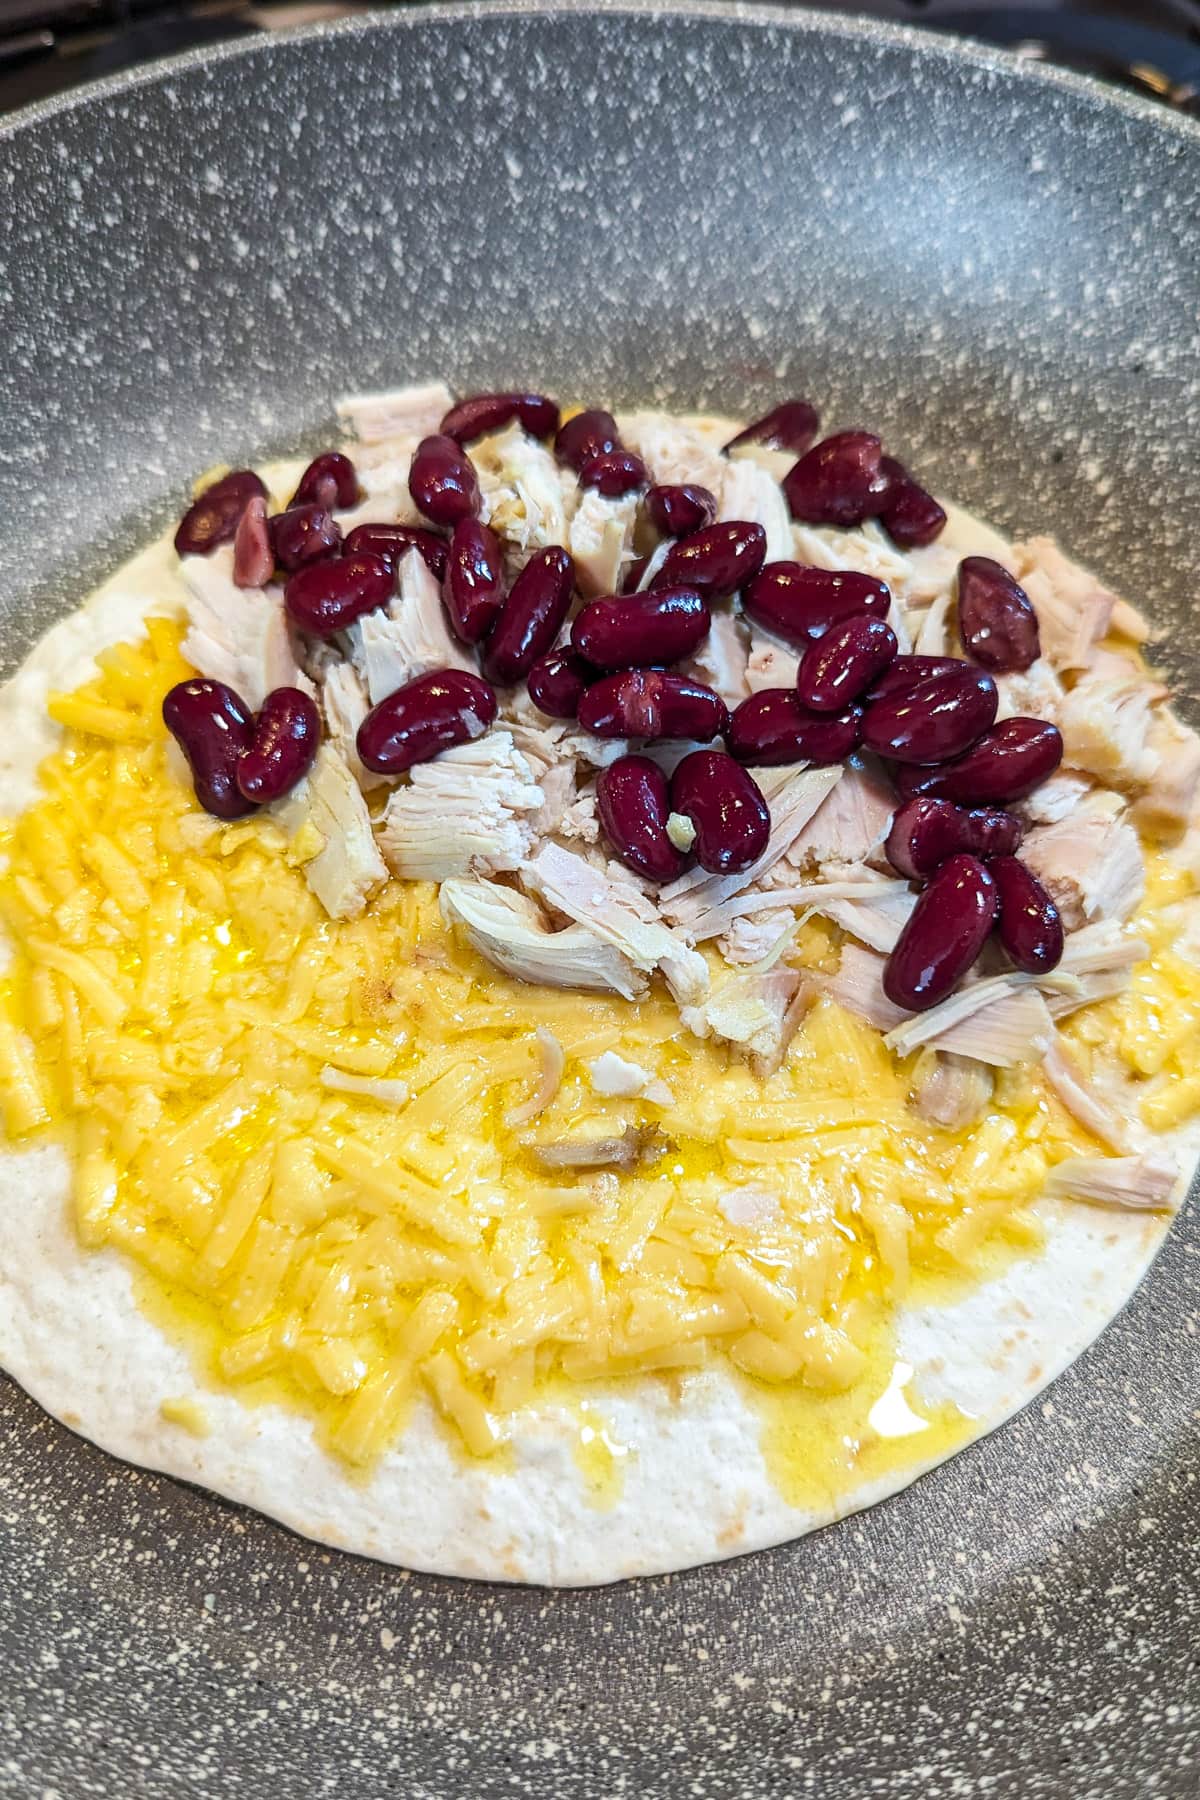 Frying pita with melted cheese, chicken and beans.